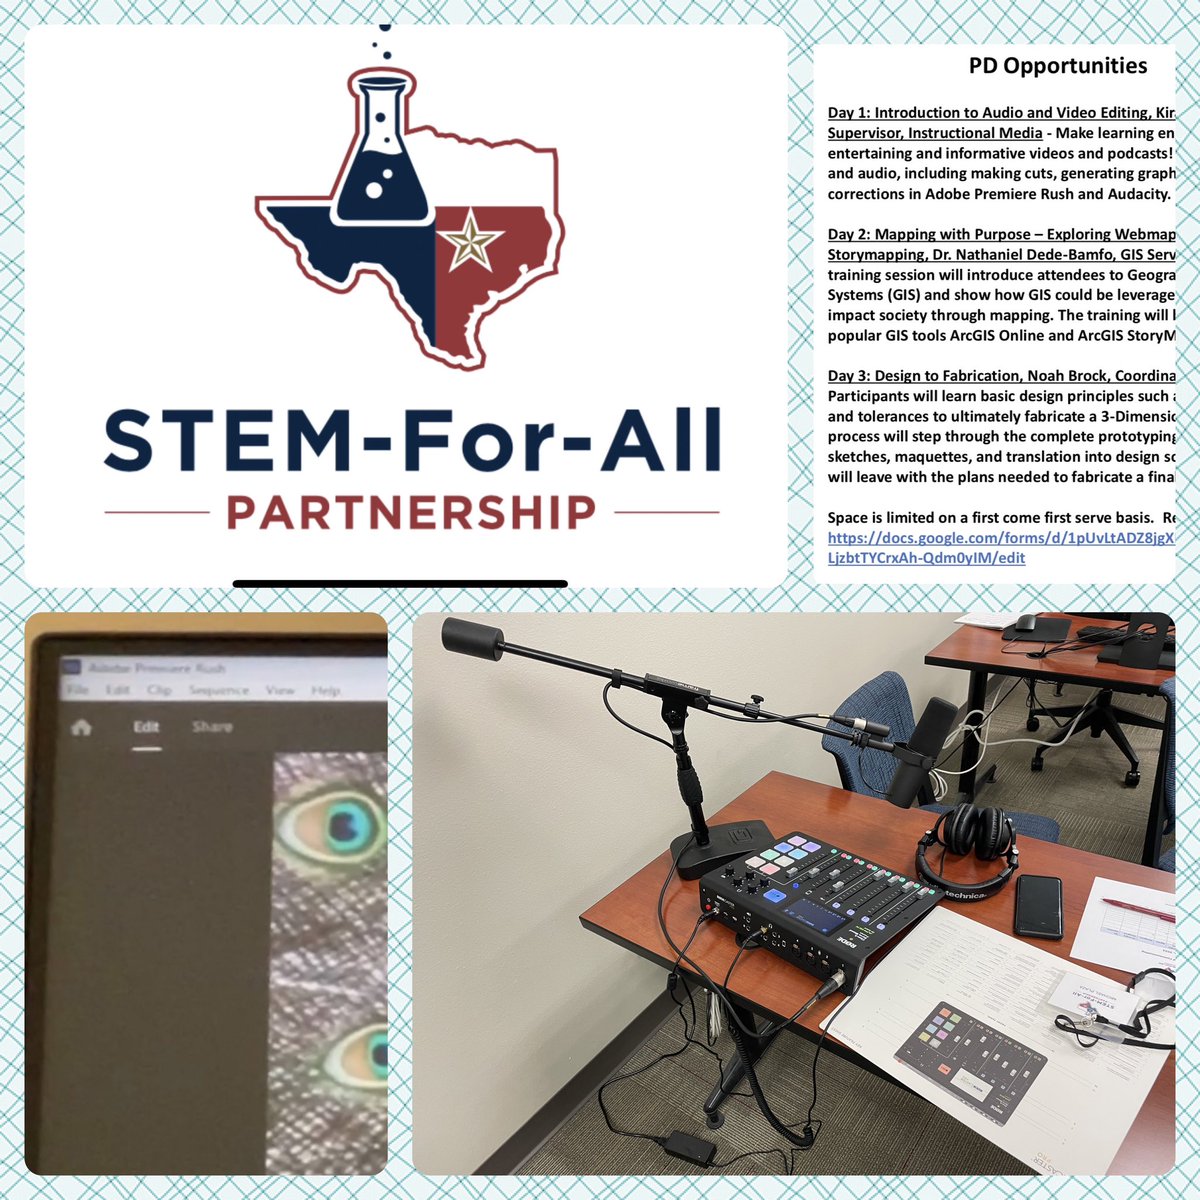 Thank you, @txstrrc for hosting @rrisdpd this week! I cannot wait to see what new great things our students accomplish next year because of this ongoing partnership.